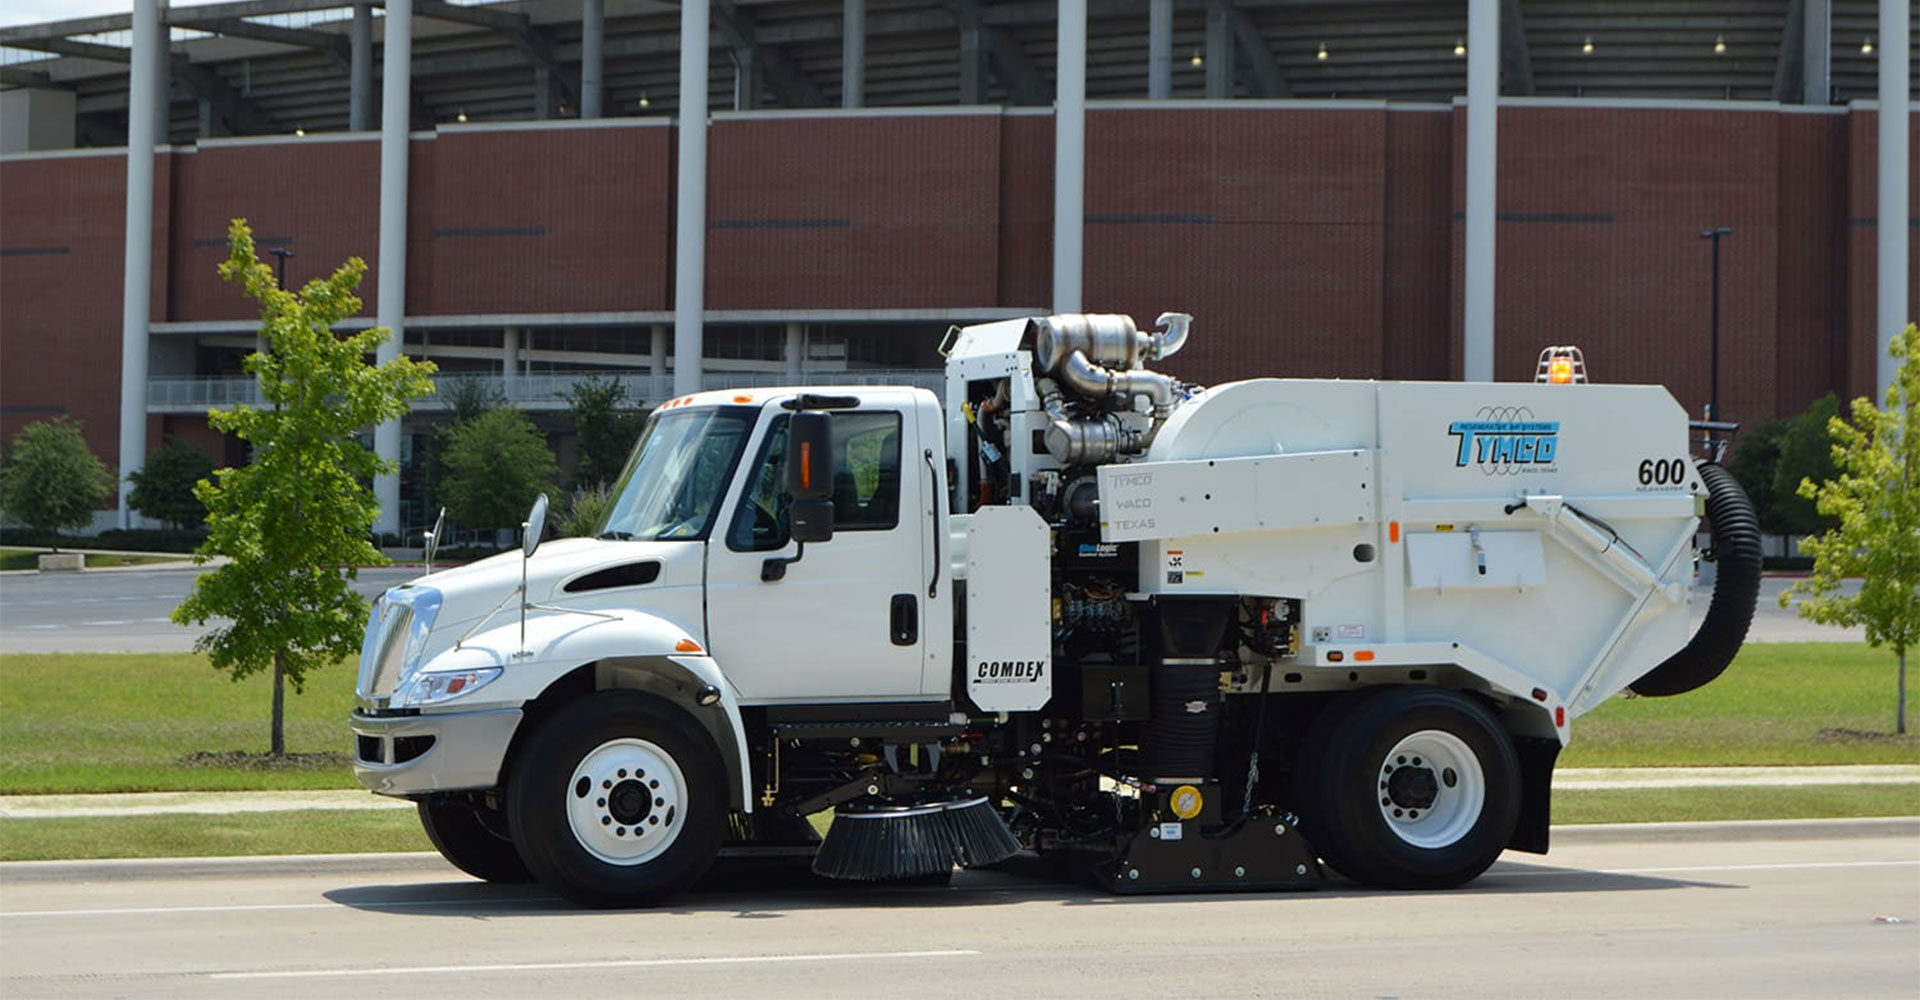 Street Sweeping Services in the Grand Rapids, Michigan area-Tymco 600 Sweeper Truck